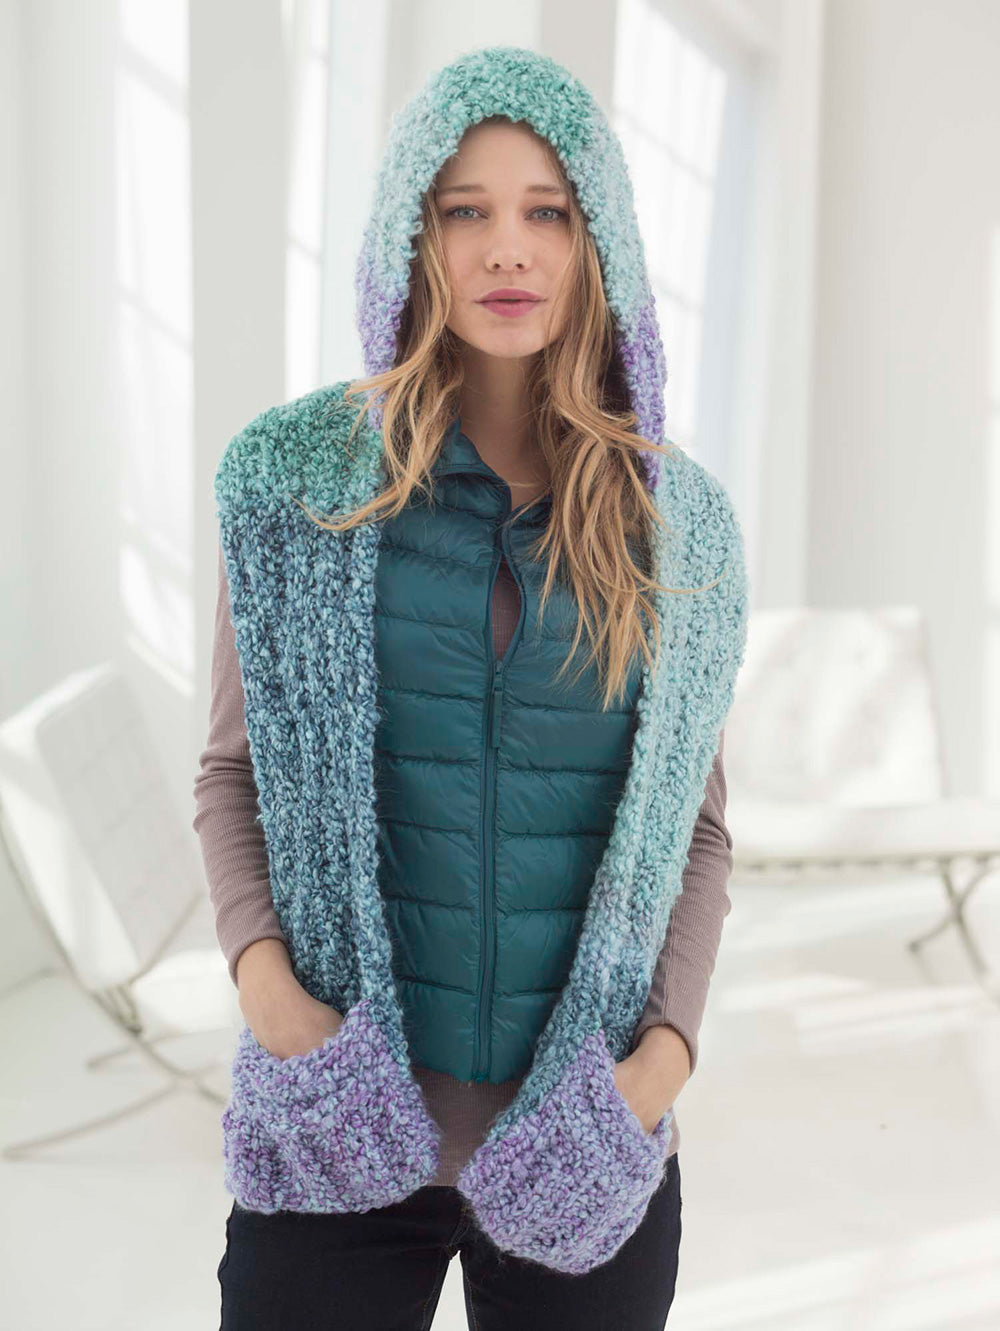 Hooded Scarf With Pockets Pattern (Knit) – Lion Brand Yarn